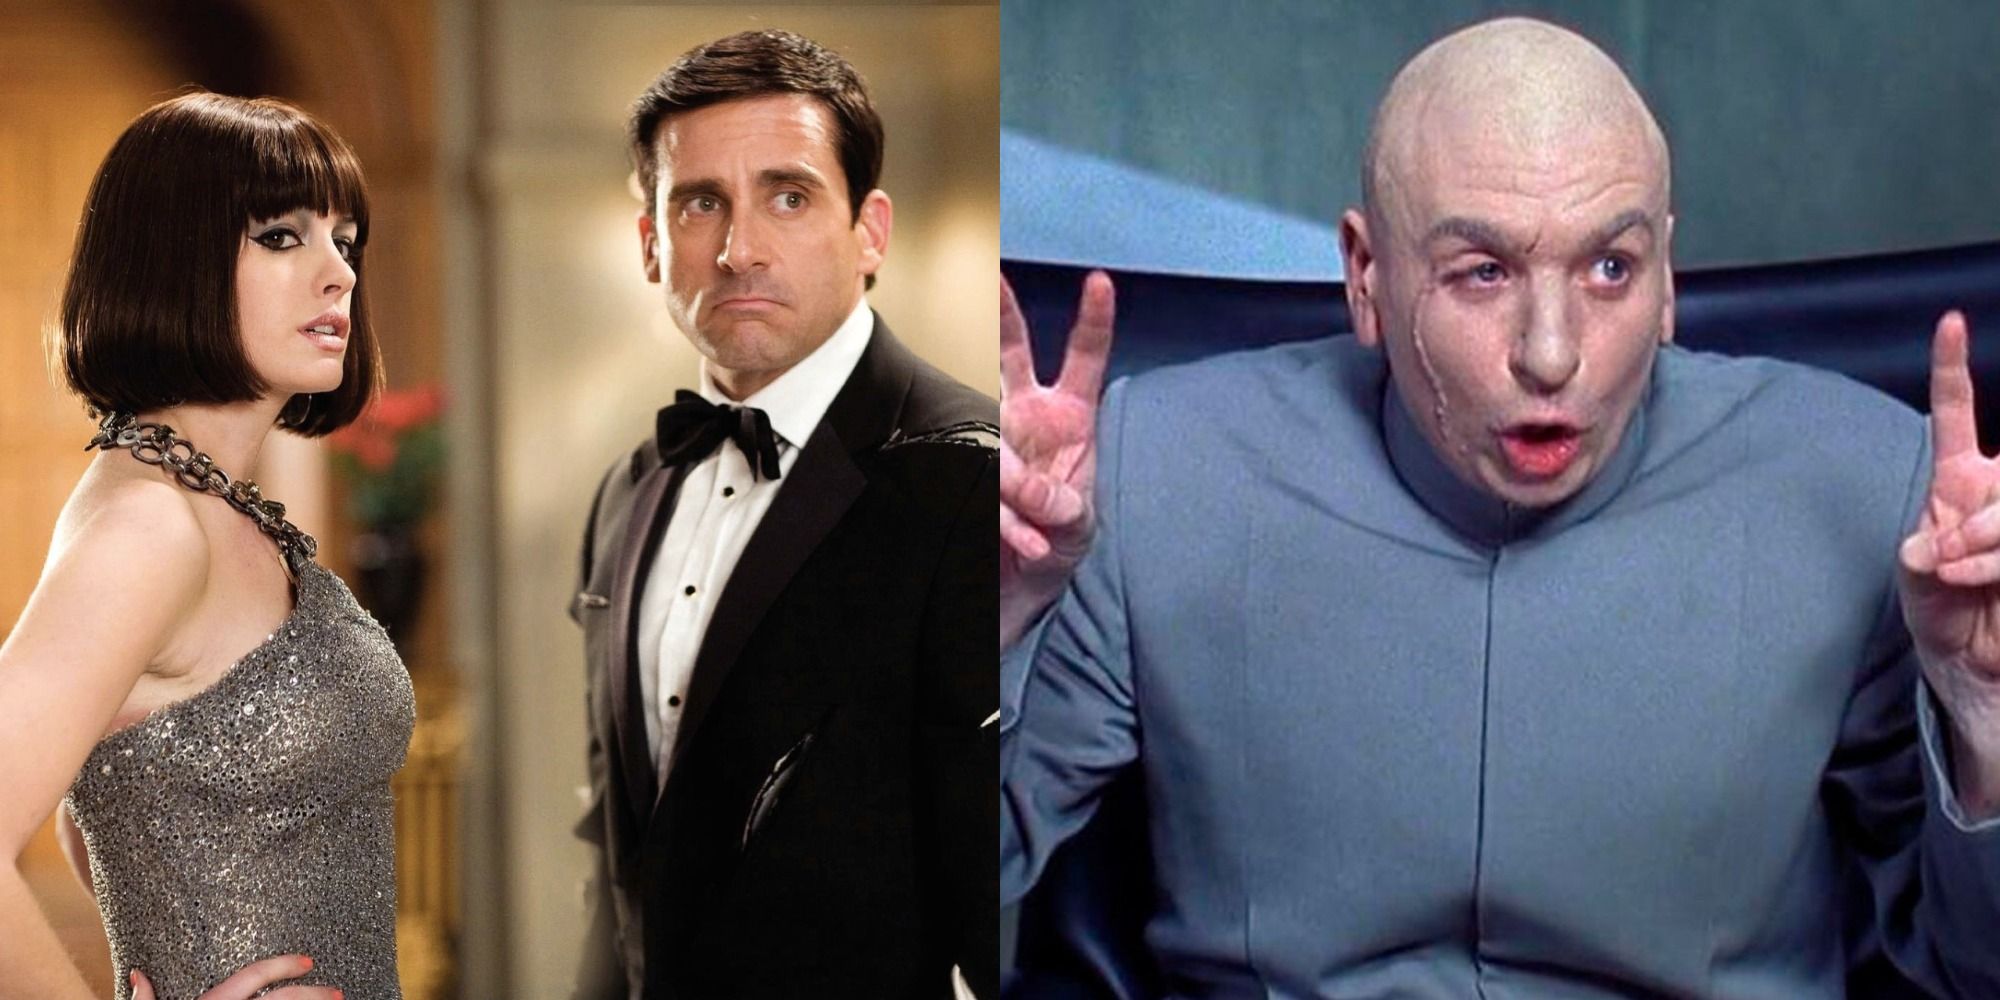 Split image showing Agents 99 and 86 in Get Smart and Dr. Evil in Austin Powers